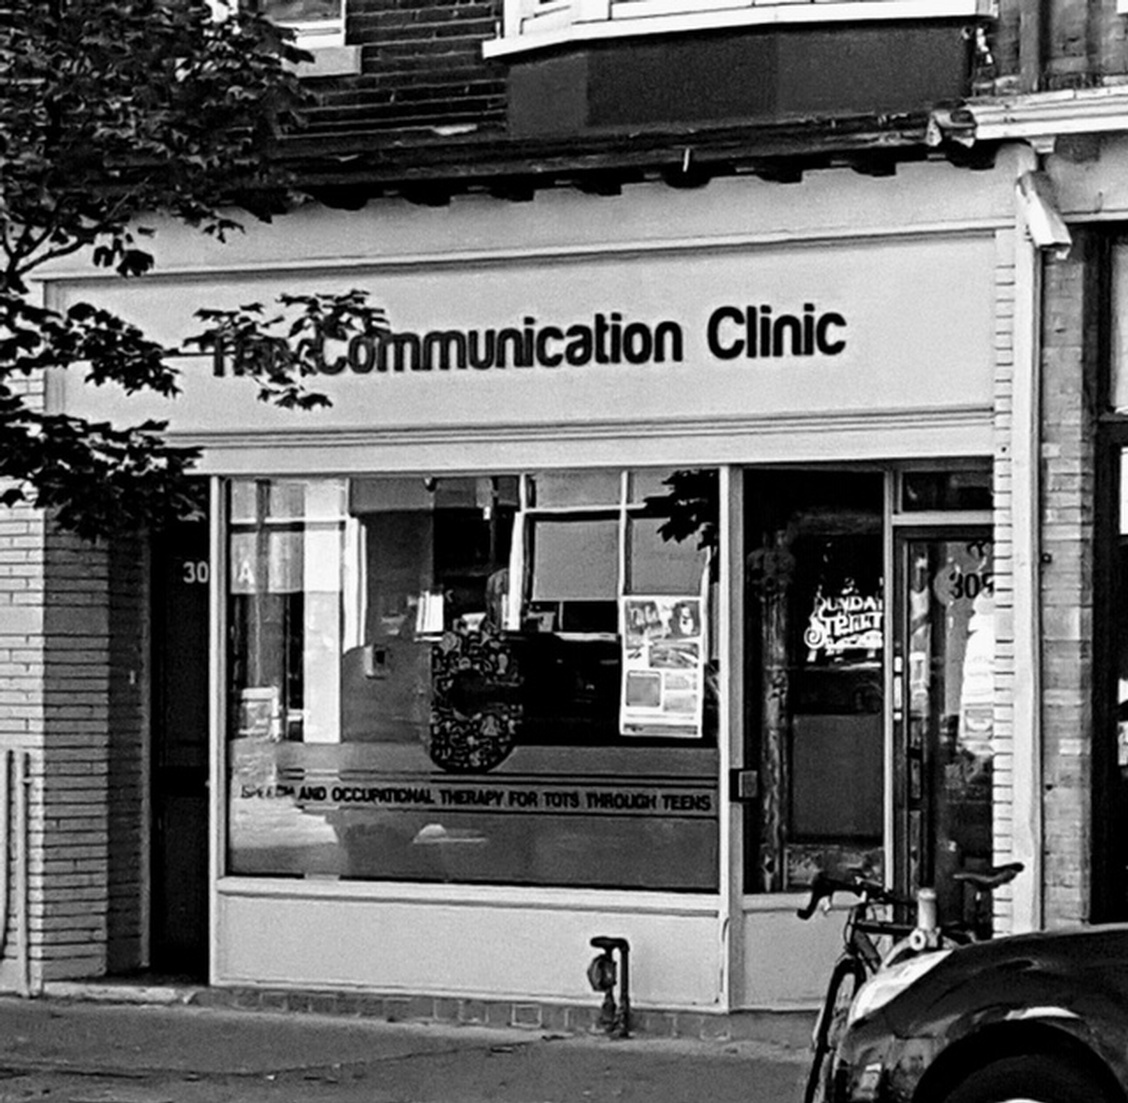 Contact The Communication Clinic